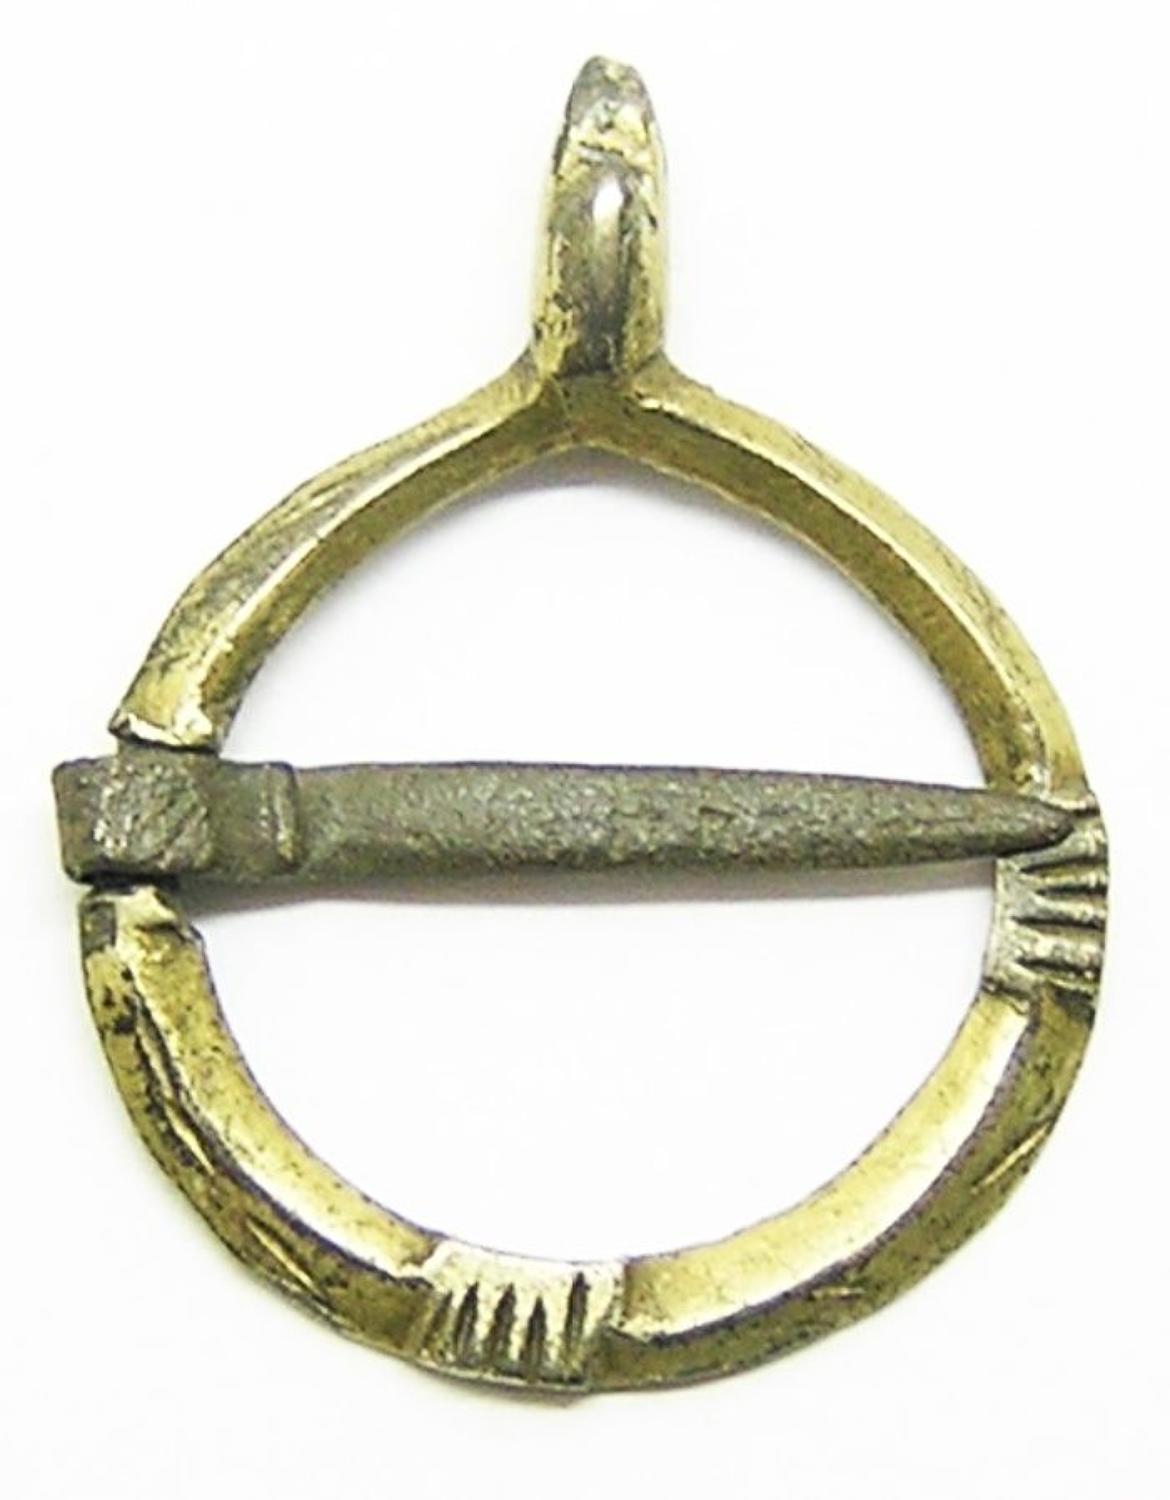 Medieval silver-gilt ring brooch clasped hands design